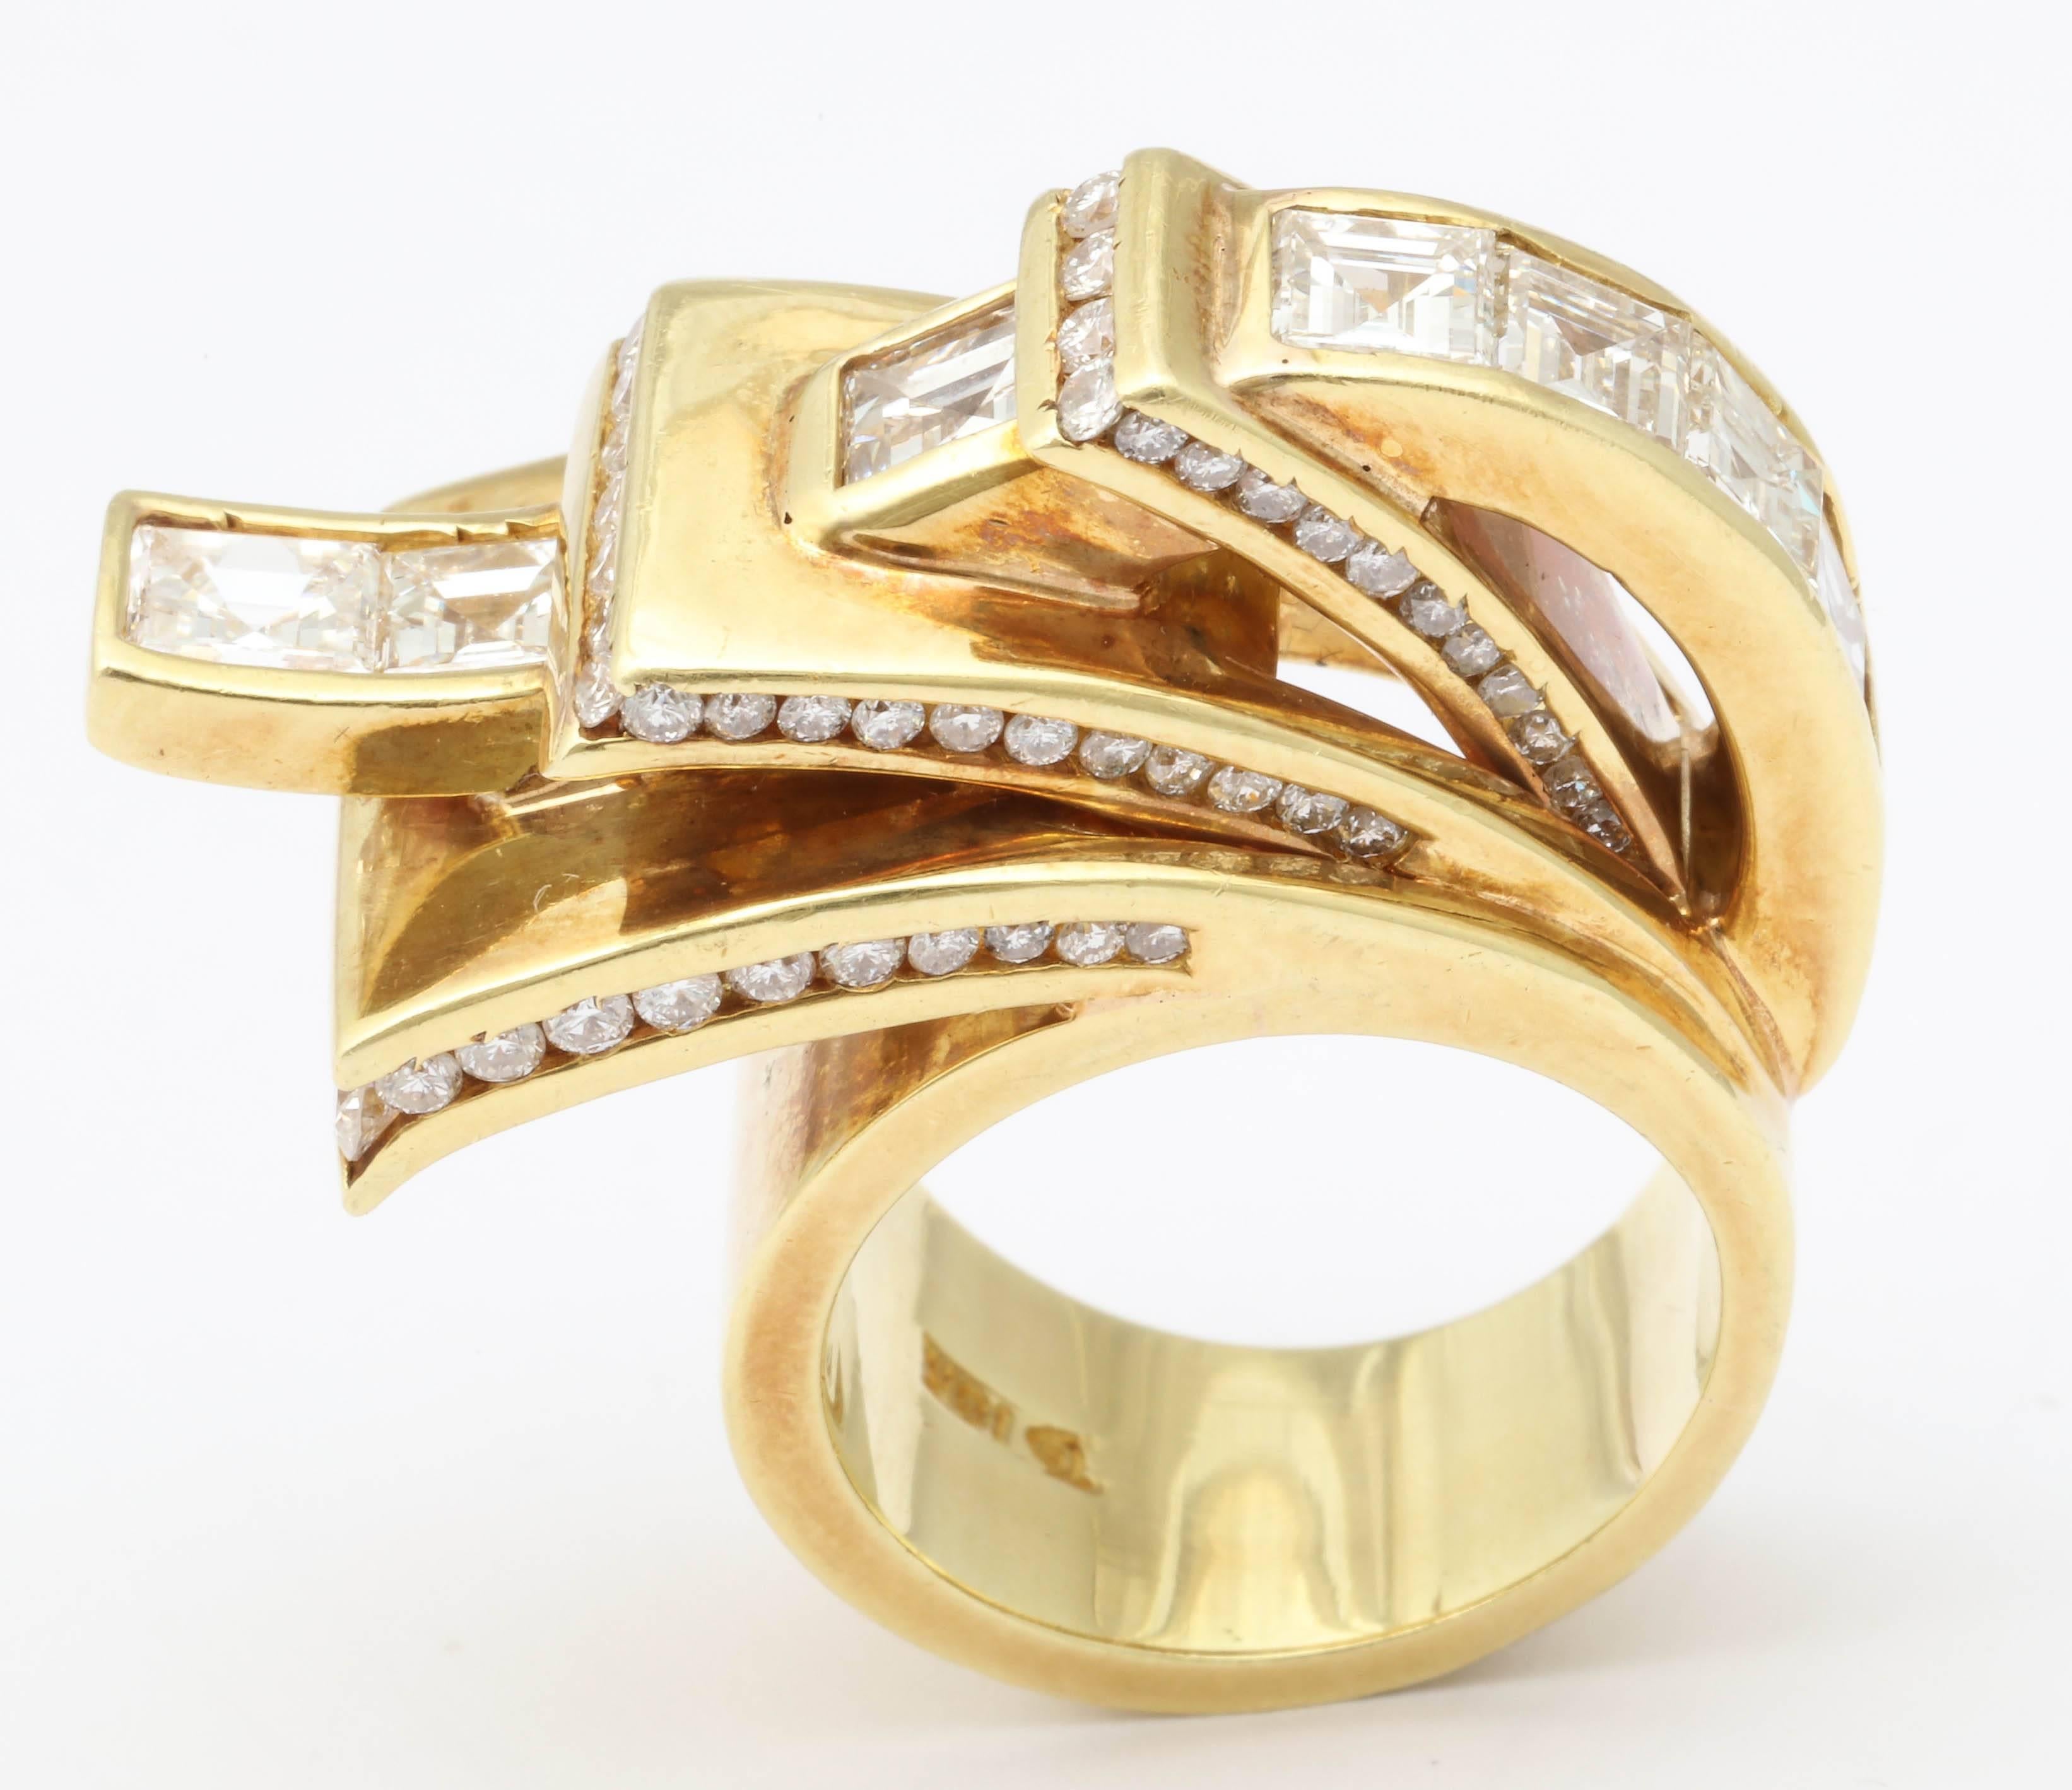 Exotic 18kt Yellow Gold multi-layer tab Ring  set with 7 super clean and white Diamond Square cuts  totaling  4.5 cts with and detailed on the sides with an additional  layer of brilliant cut Diamonds .  Signed with a D in a shield, but not